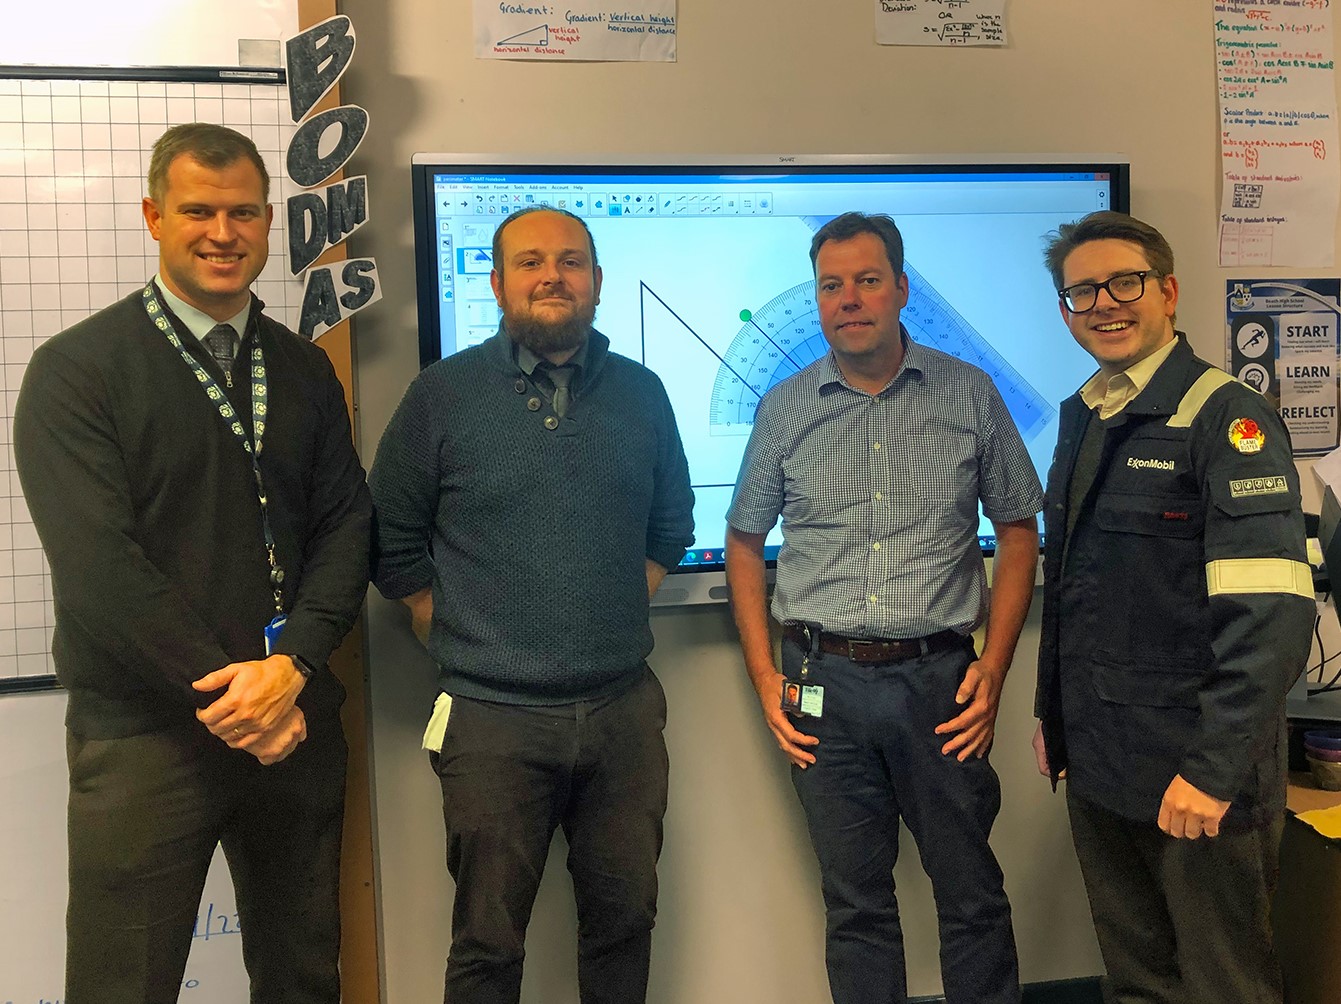 Image From left to right, Martin Darling, Principal Teacher of Business and IT at Beath High; 
Alistair Brown, Maths teacher at Beath High; Andy Fyall, senior technician and Tom 
Antram, Community Liaison at FEP.